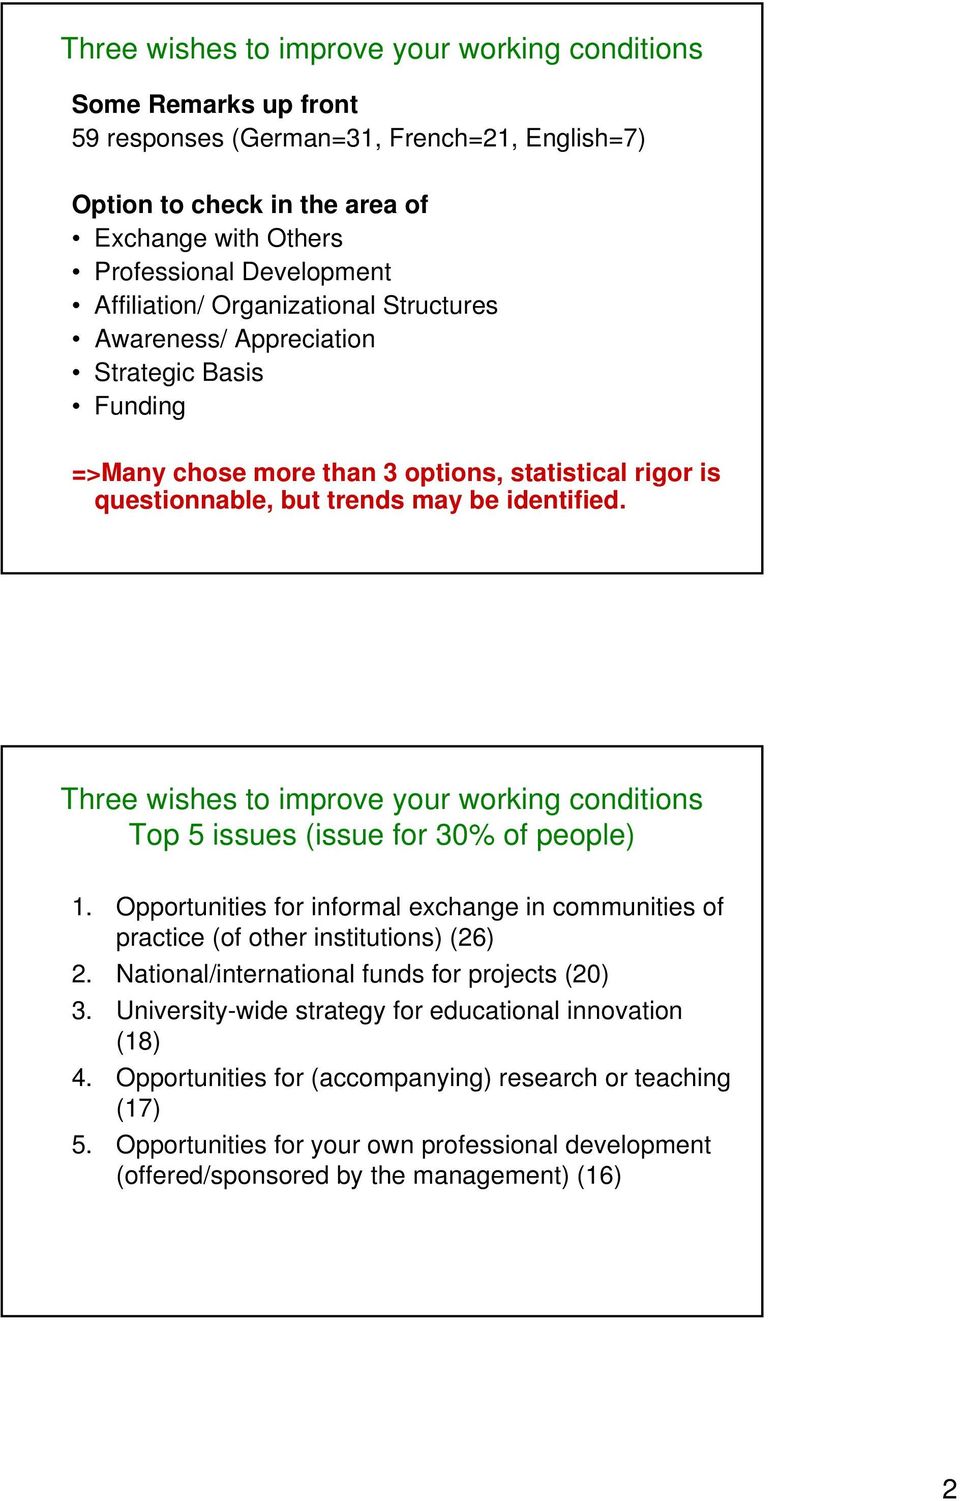 Three wishes to improve your working conditions Top 5 issues (issue for 30% of people) 1. Opportunities for informal exchange in communities of practice (of other institutions) (26) 2.